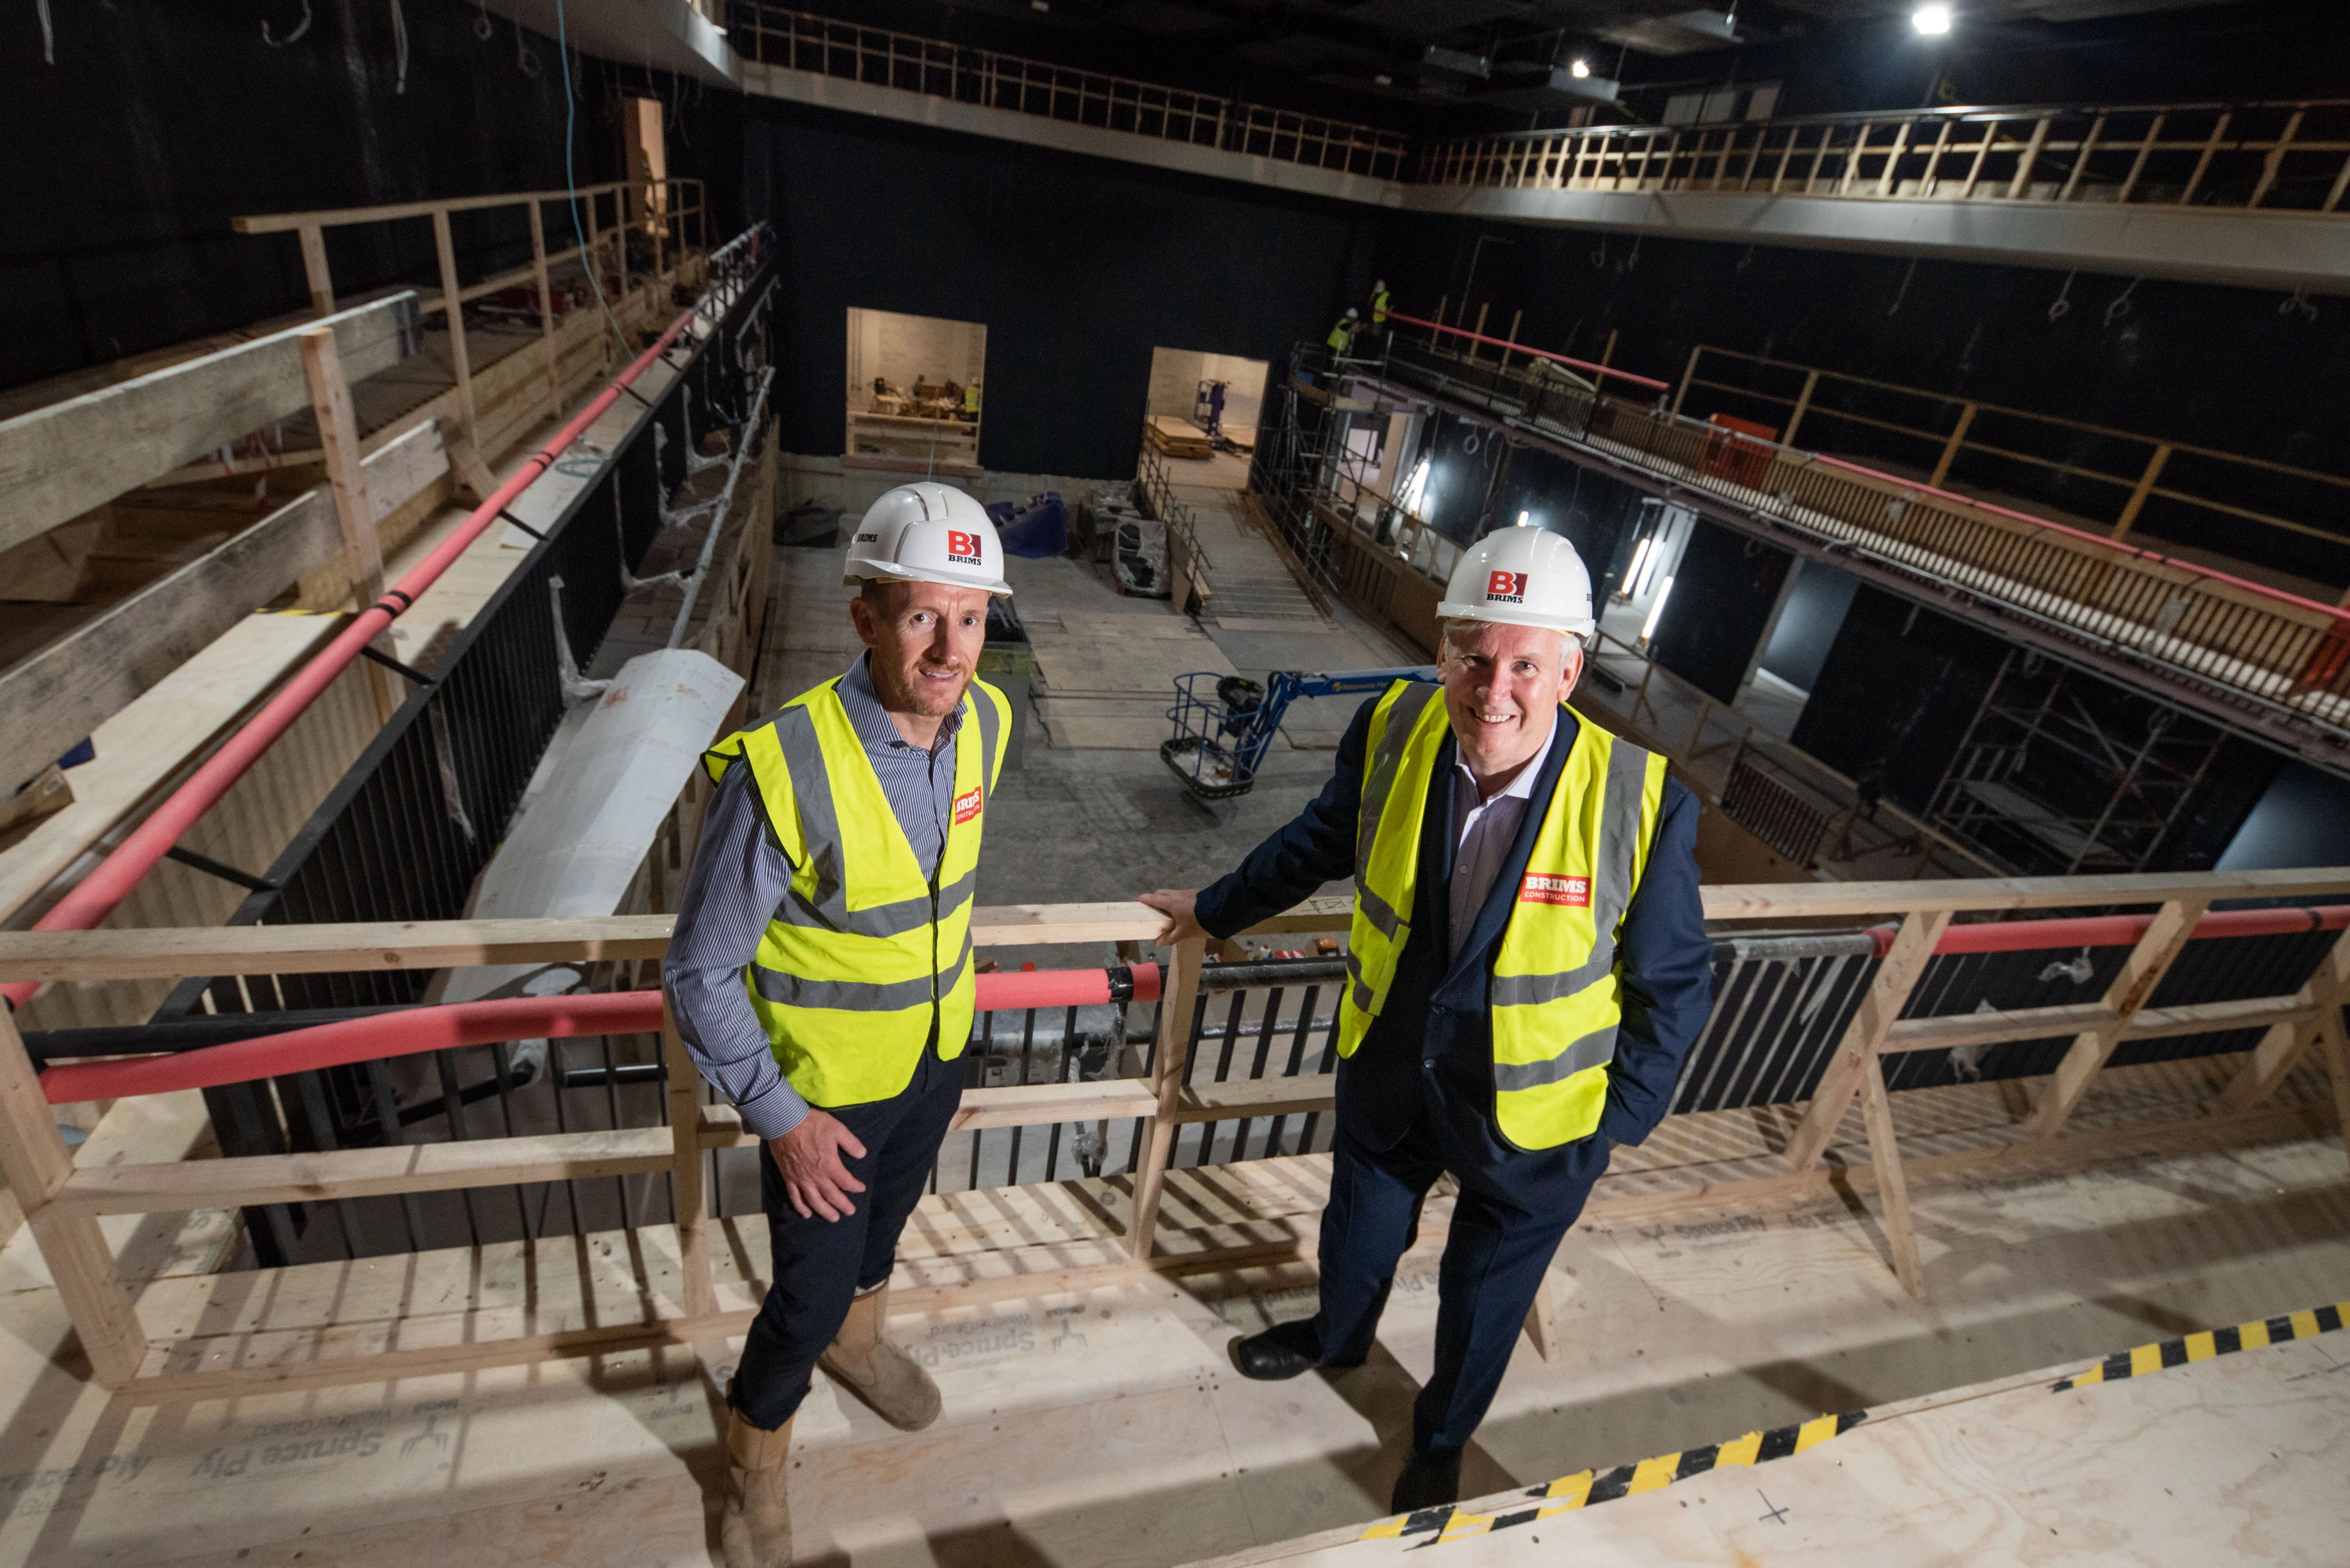 Brims director, Richard Wood (left) with Paul Callaghan, Chair of the MAC Trust, inspecting progress at the MACQ Theatre, Sunderland.